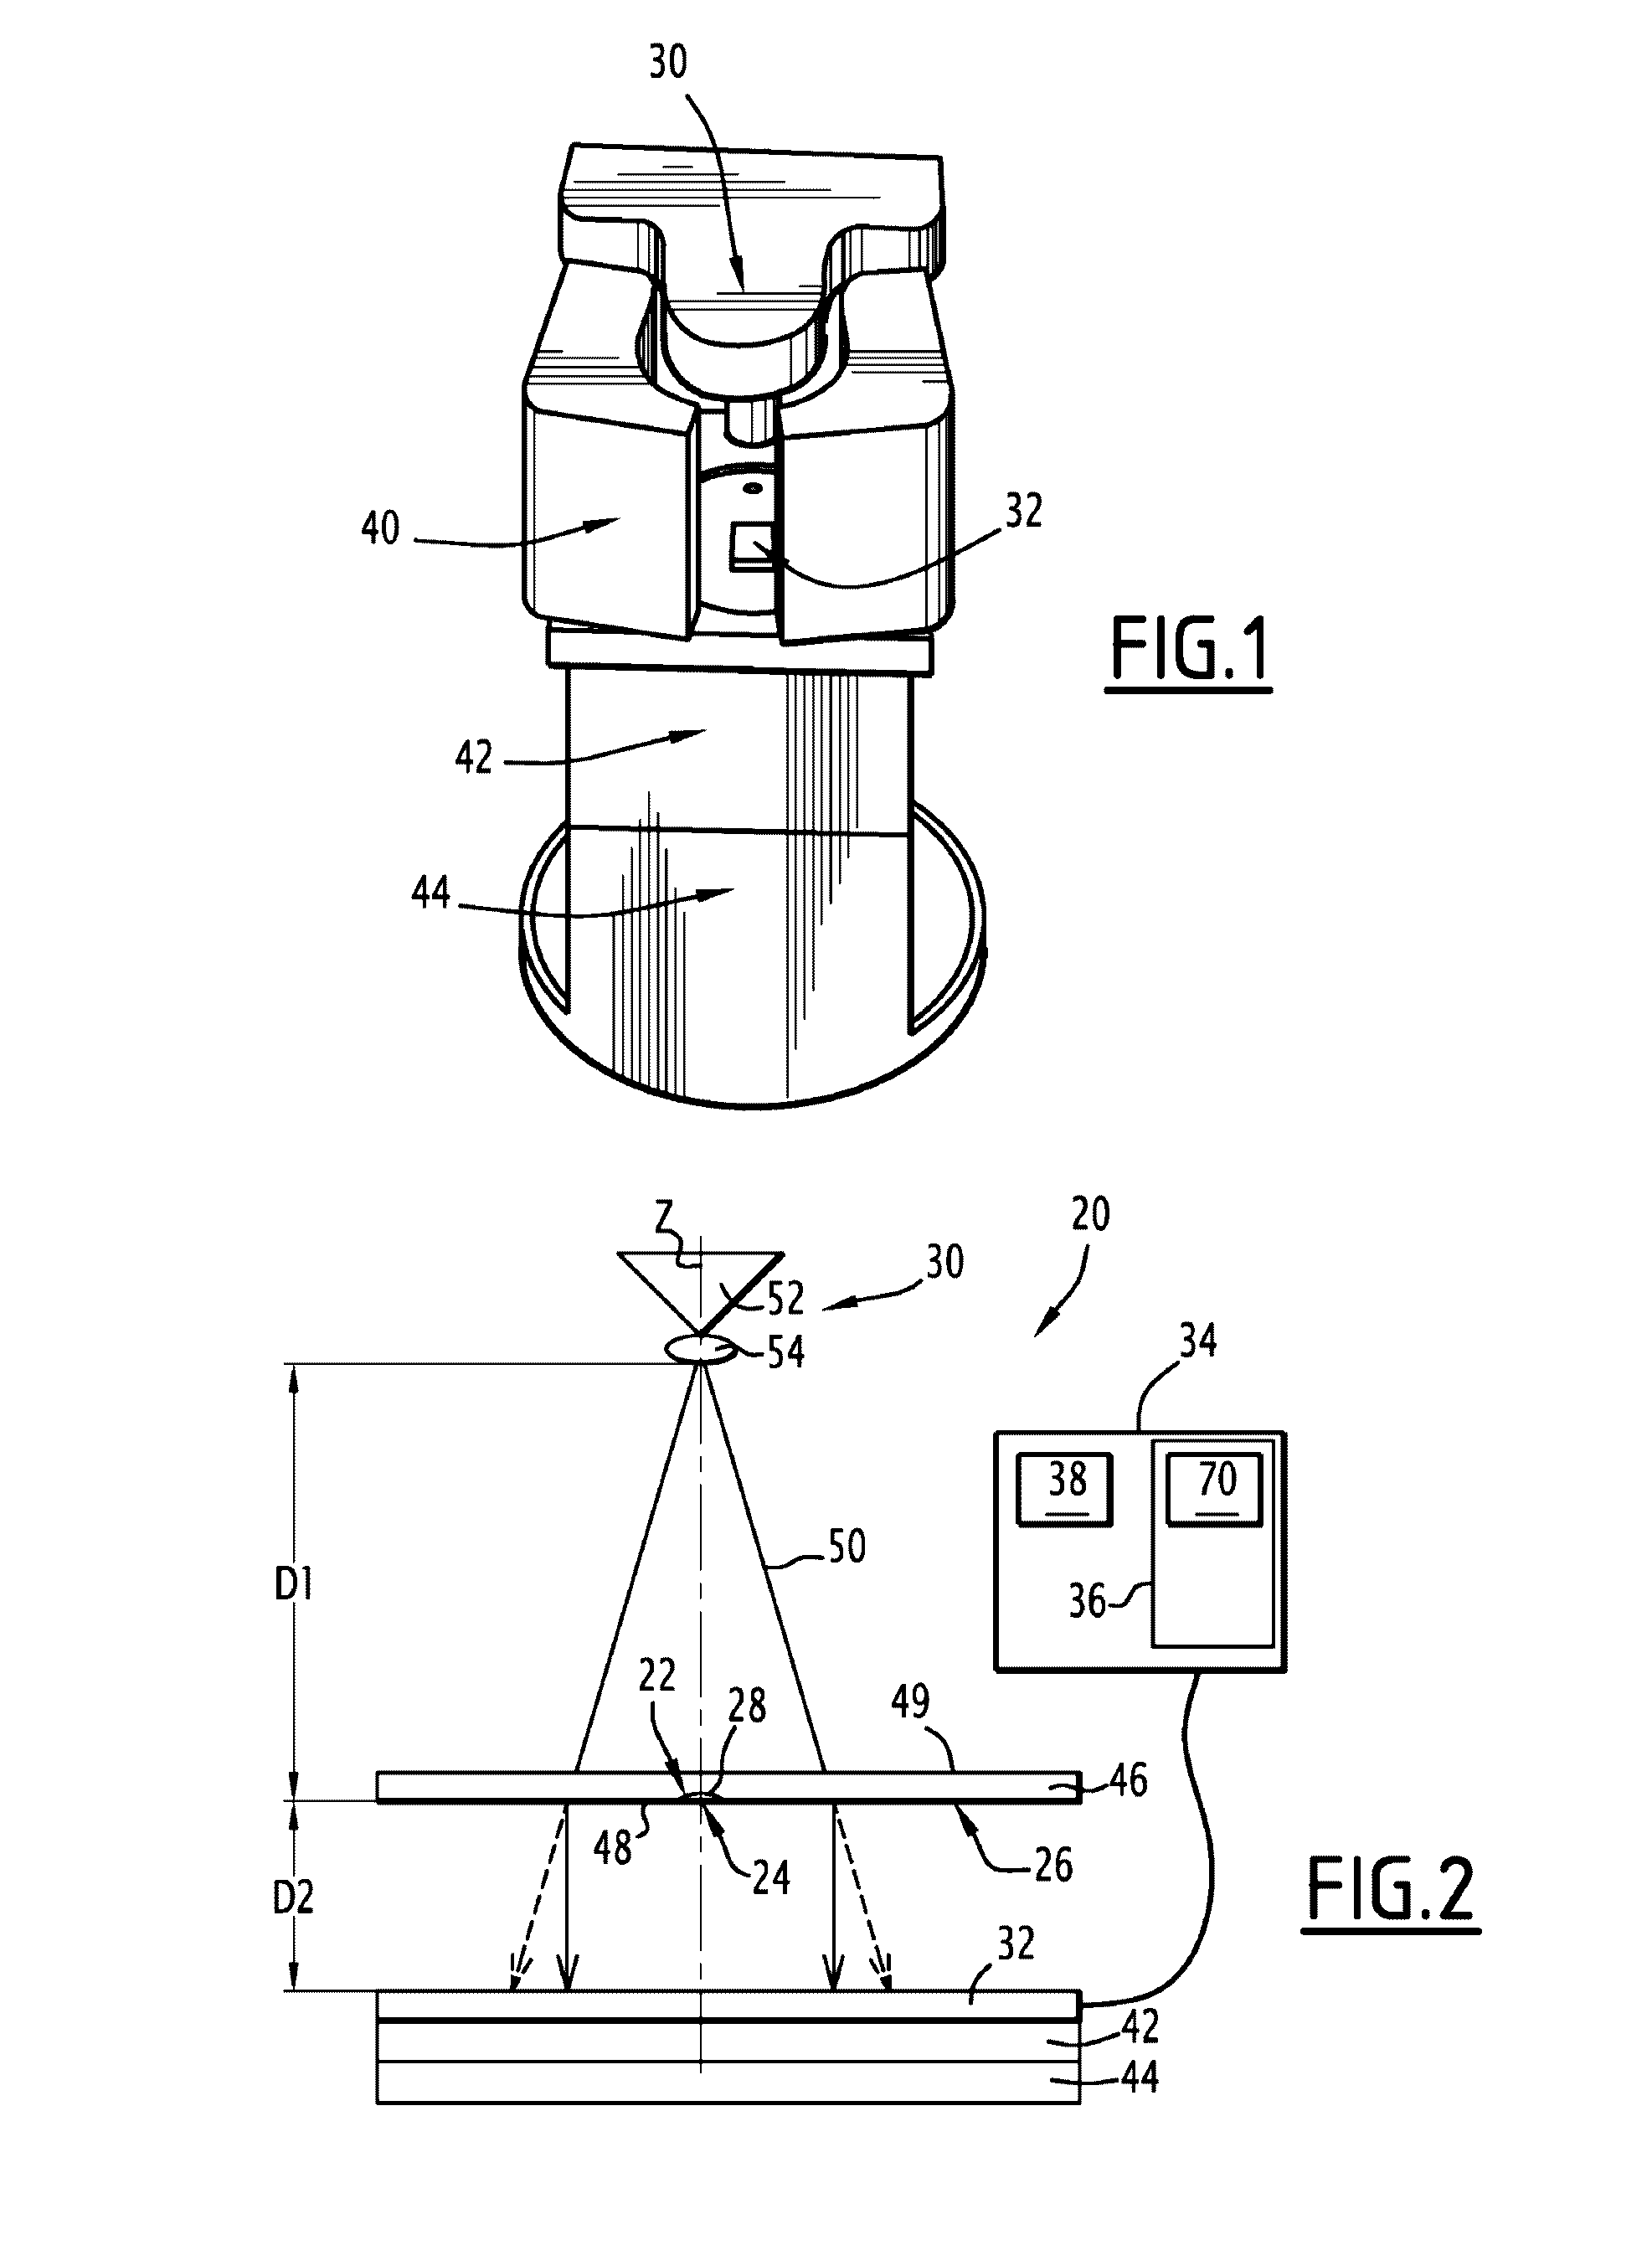 Method and system for detecting at least one particle in a bodily fluid, and associated method for diagnosing meningitis